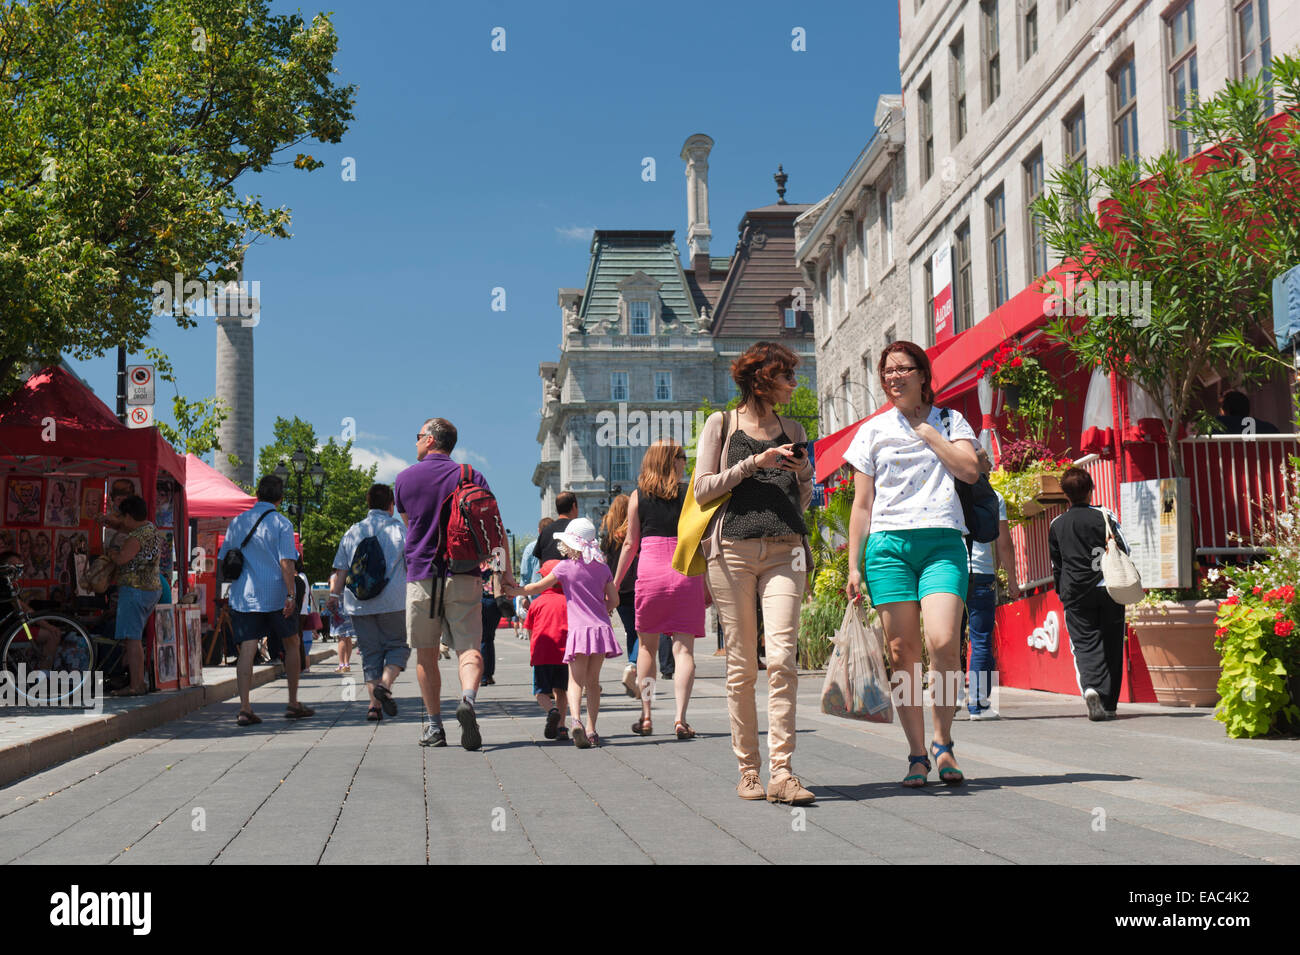 People strolling on Place Jacques Cartier, Old Montreal, Canada. Stock Photo